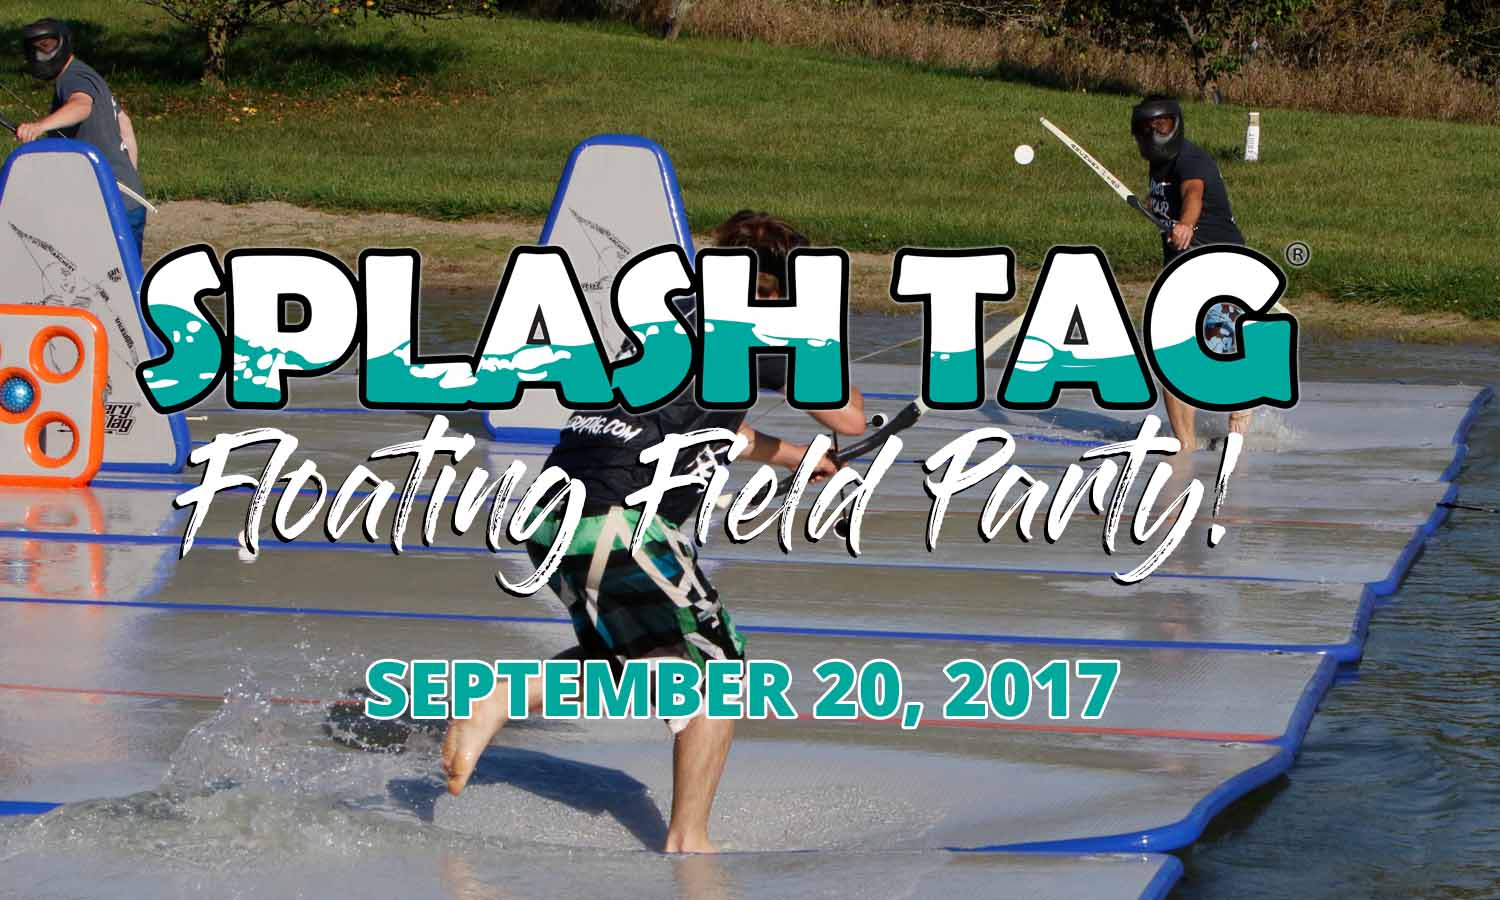 Splash Tag® Floating Field Party!